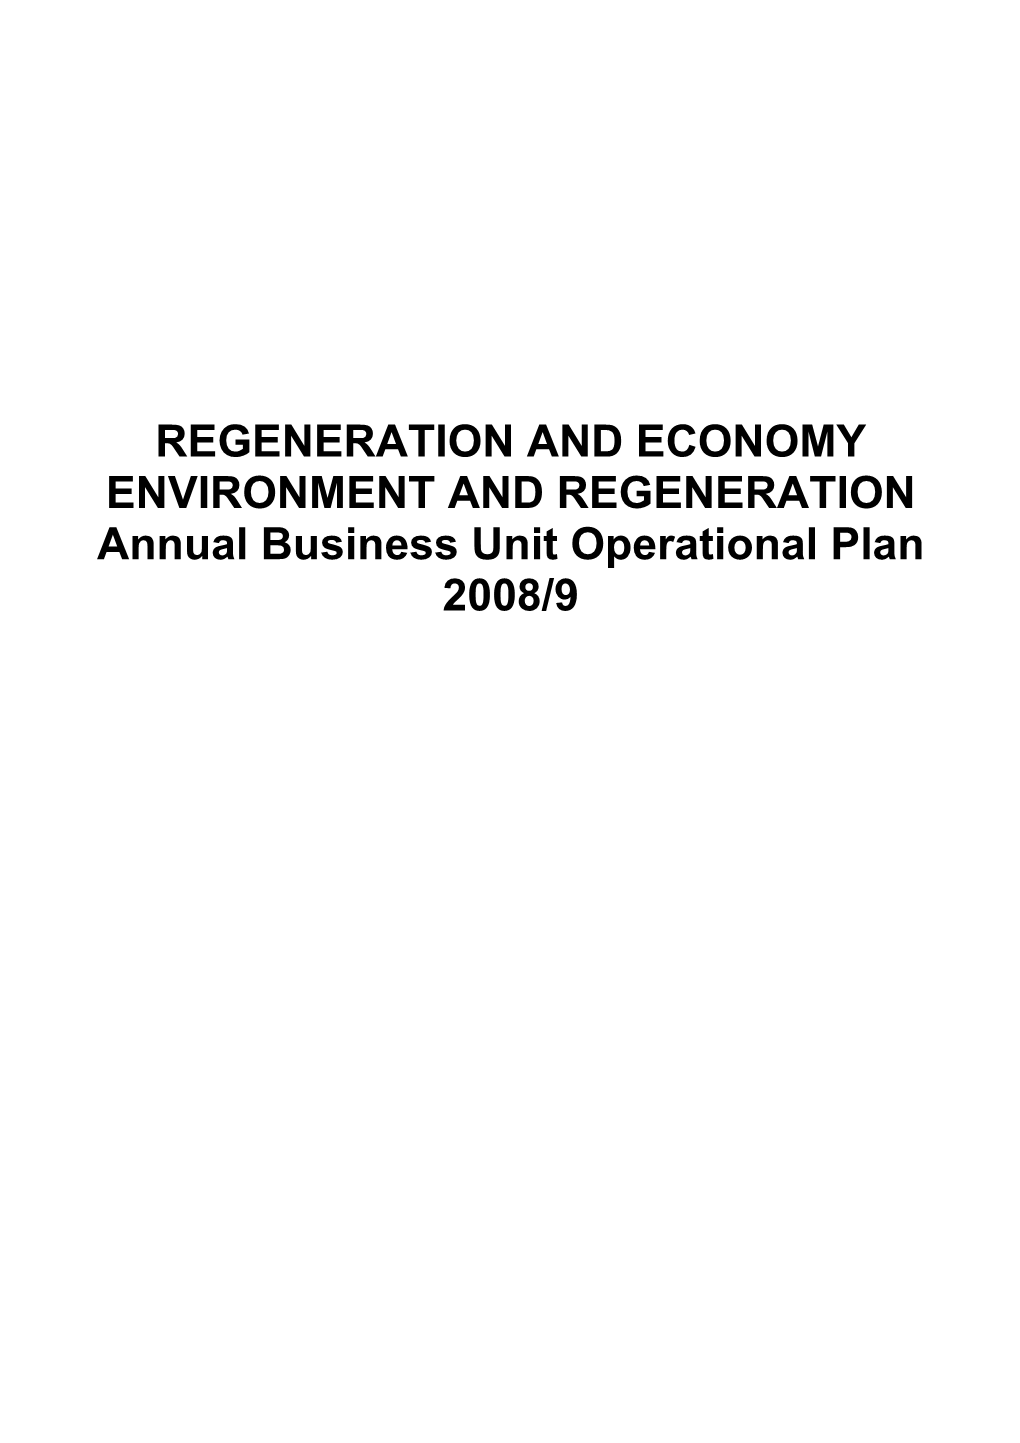 REGENERATION and ECONOMY ENVIRONMENT and REGENERATION Annual Business Unit Operational Plan 2008/9